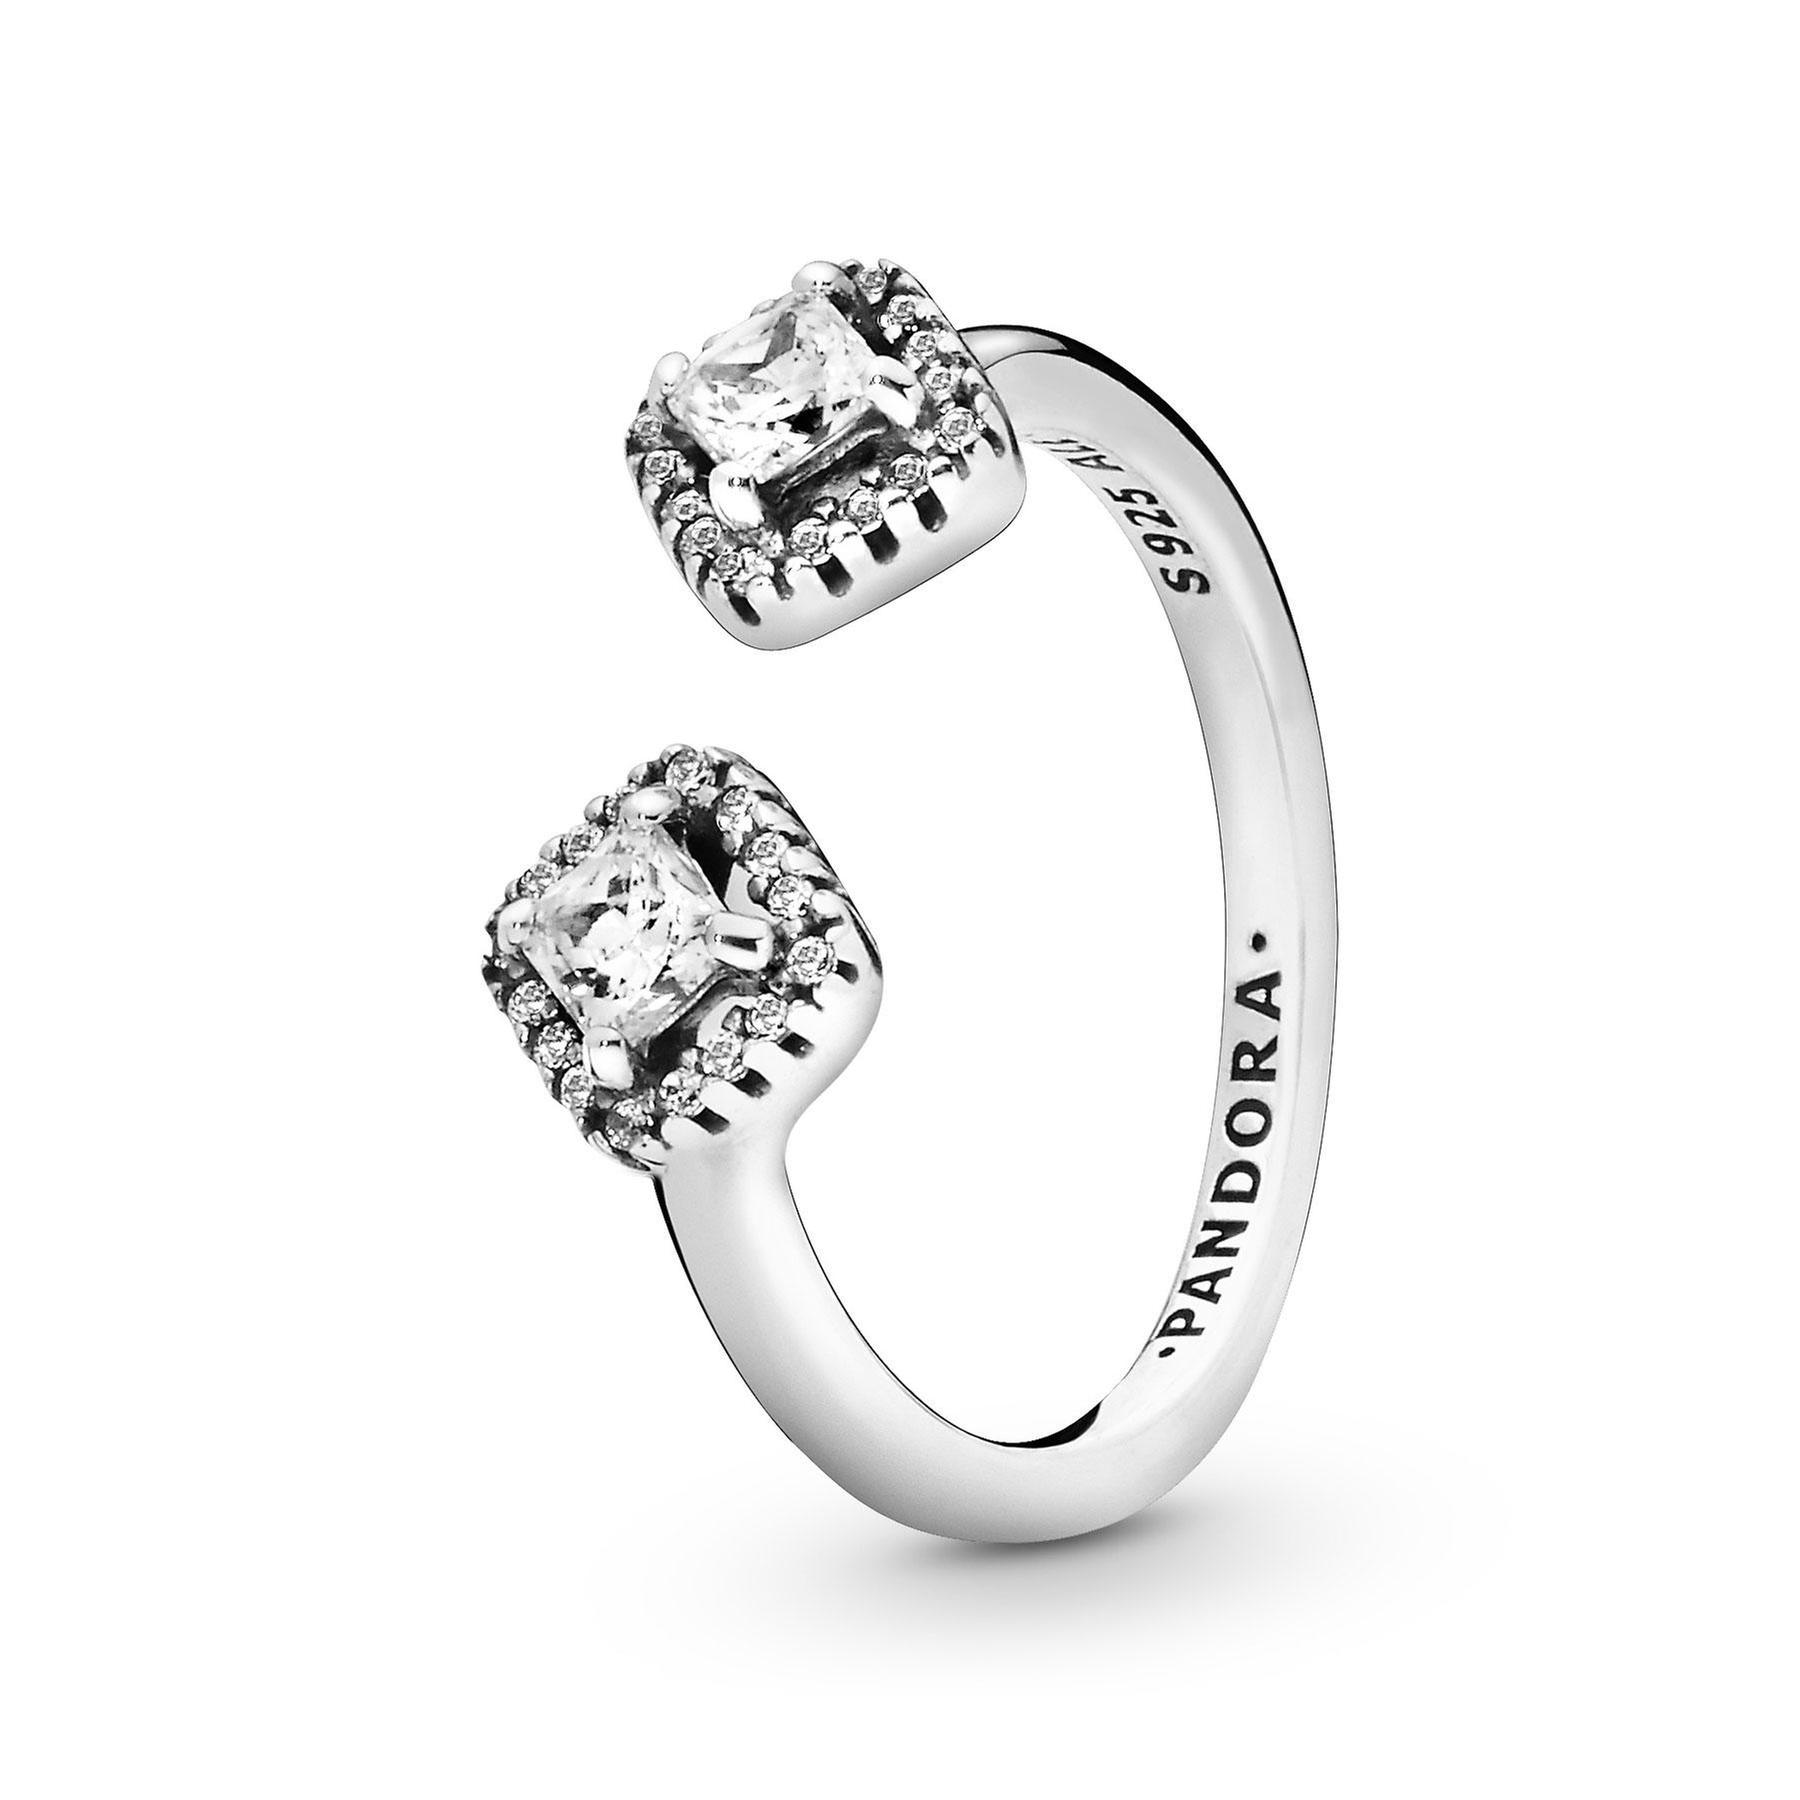 Pandora Square Sparkle Open Ring | REEDS Jewelers